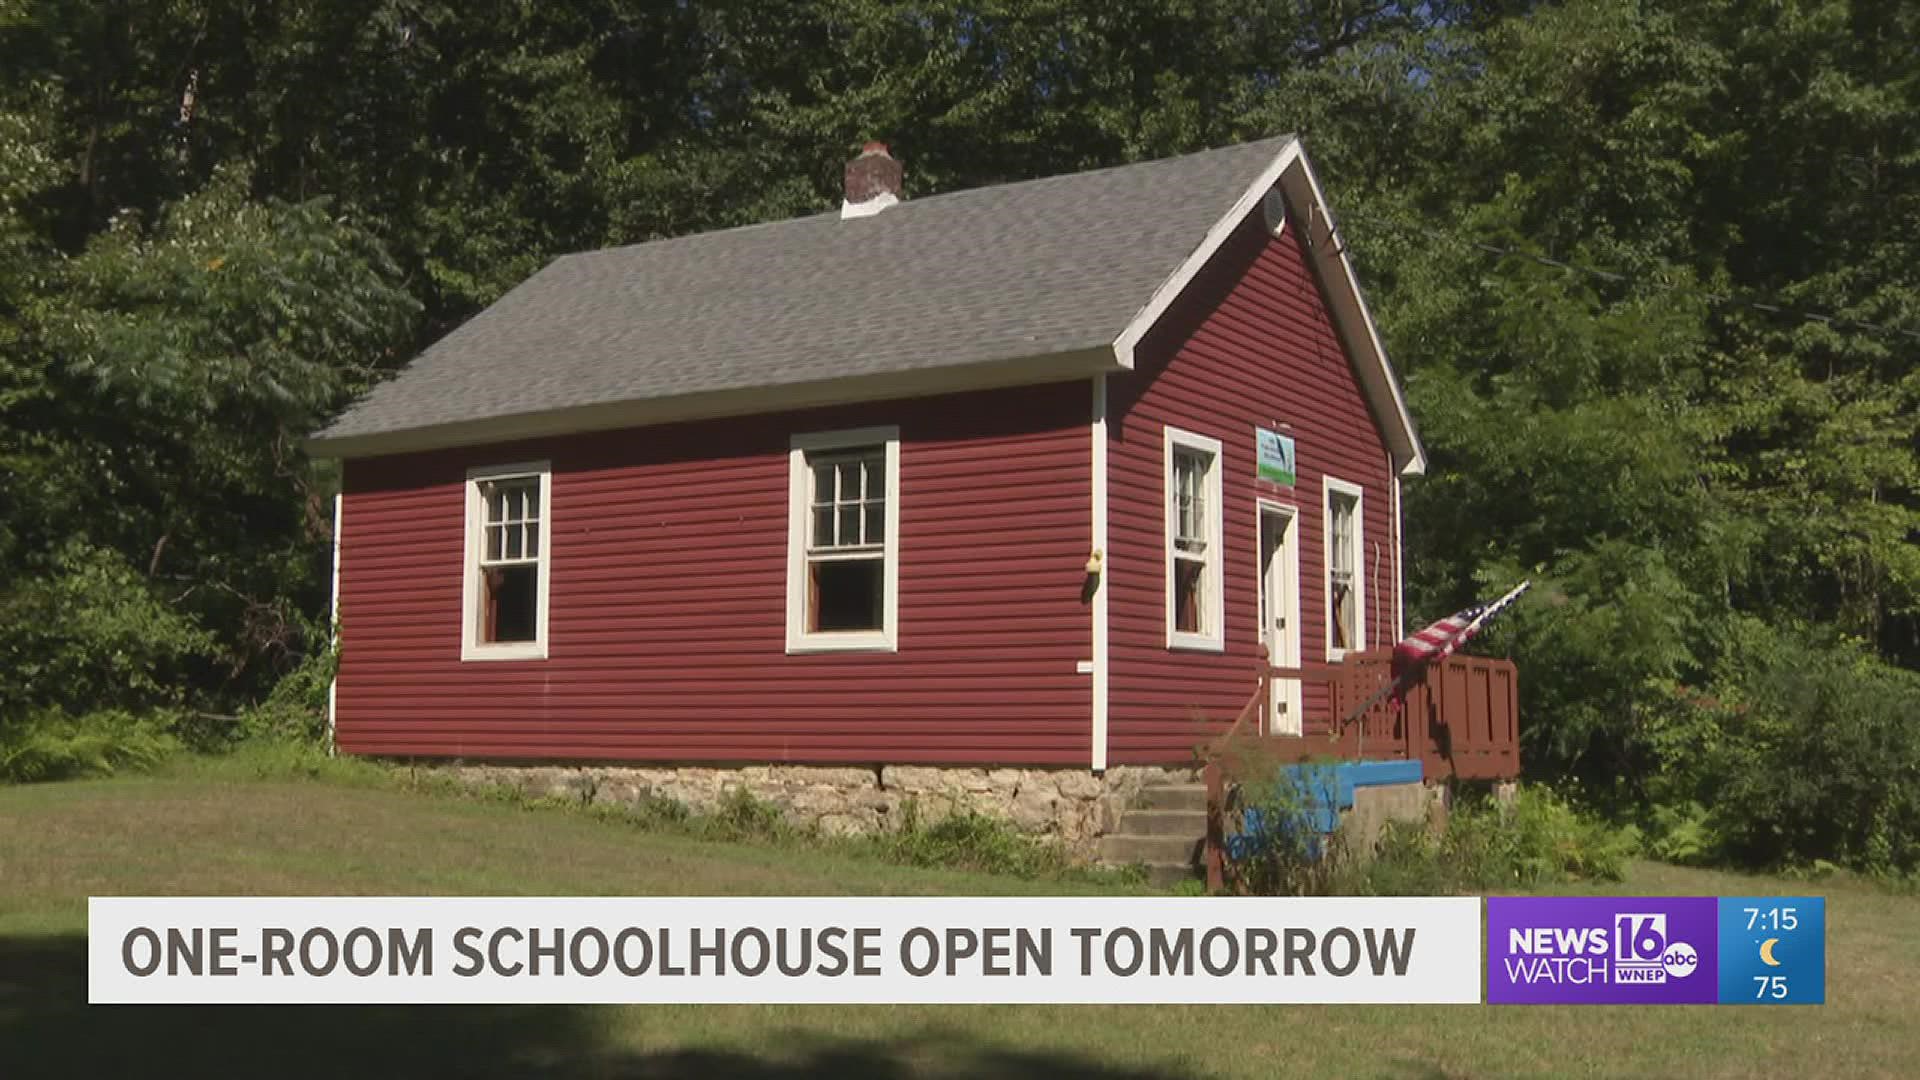 In Monroe County, the last one-room schoolhouse is once again opening its doors for a history lesson.